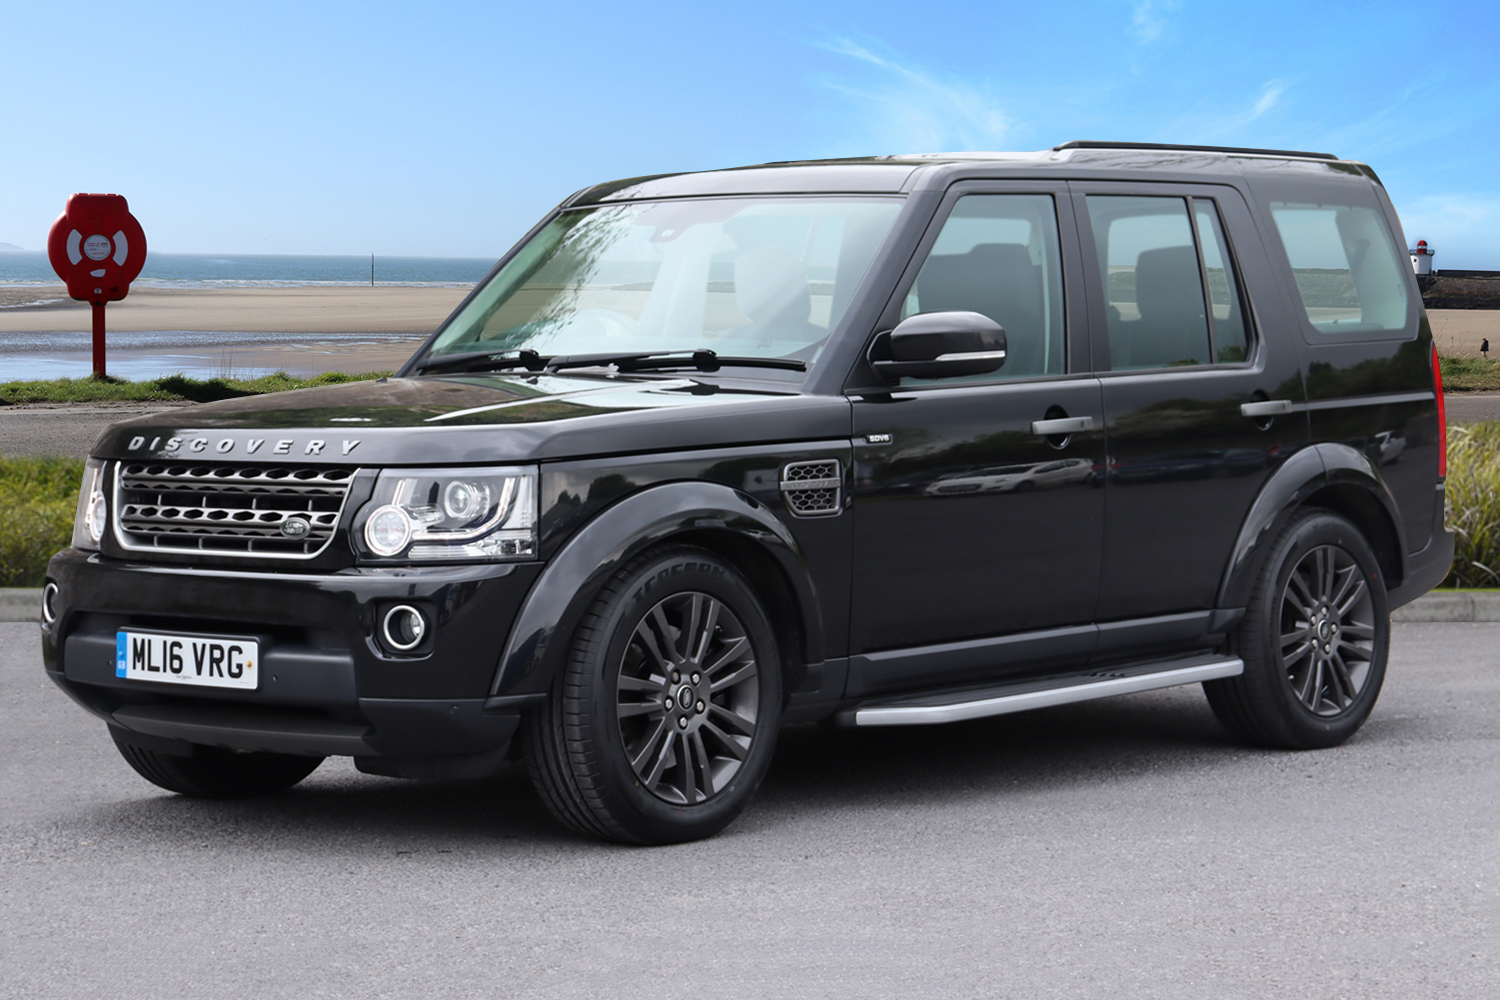 Rover Discovery | 3.0 SDV6 Graphite 5dr Auto | 7 Seats | Euro 6 - Go Explore Custom Vans & Campers South Wales